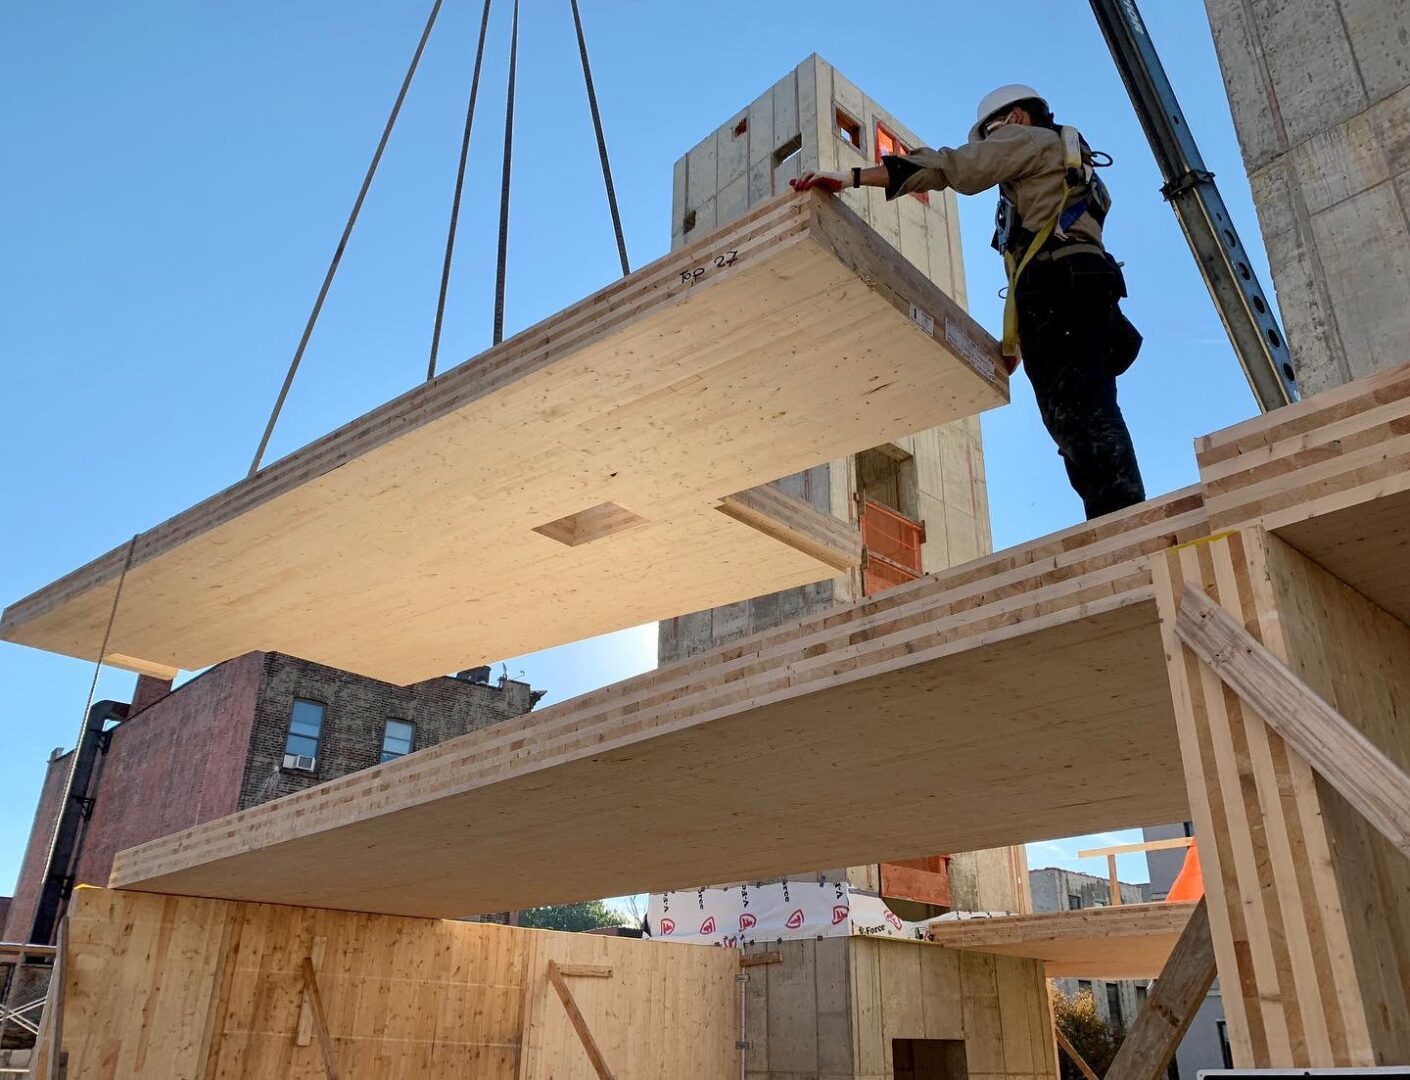 A man is working on a construction site with wooden beams, building the First Cross Laminated Timber building in New York City.